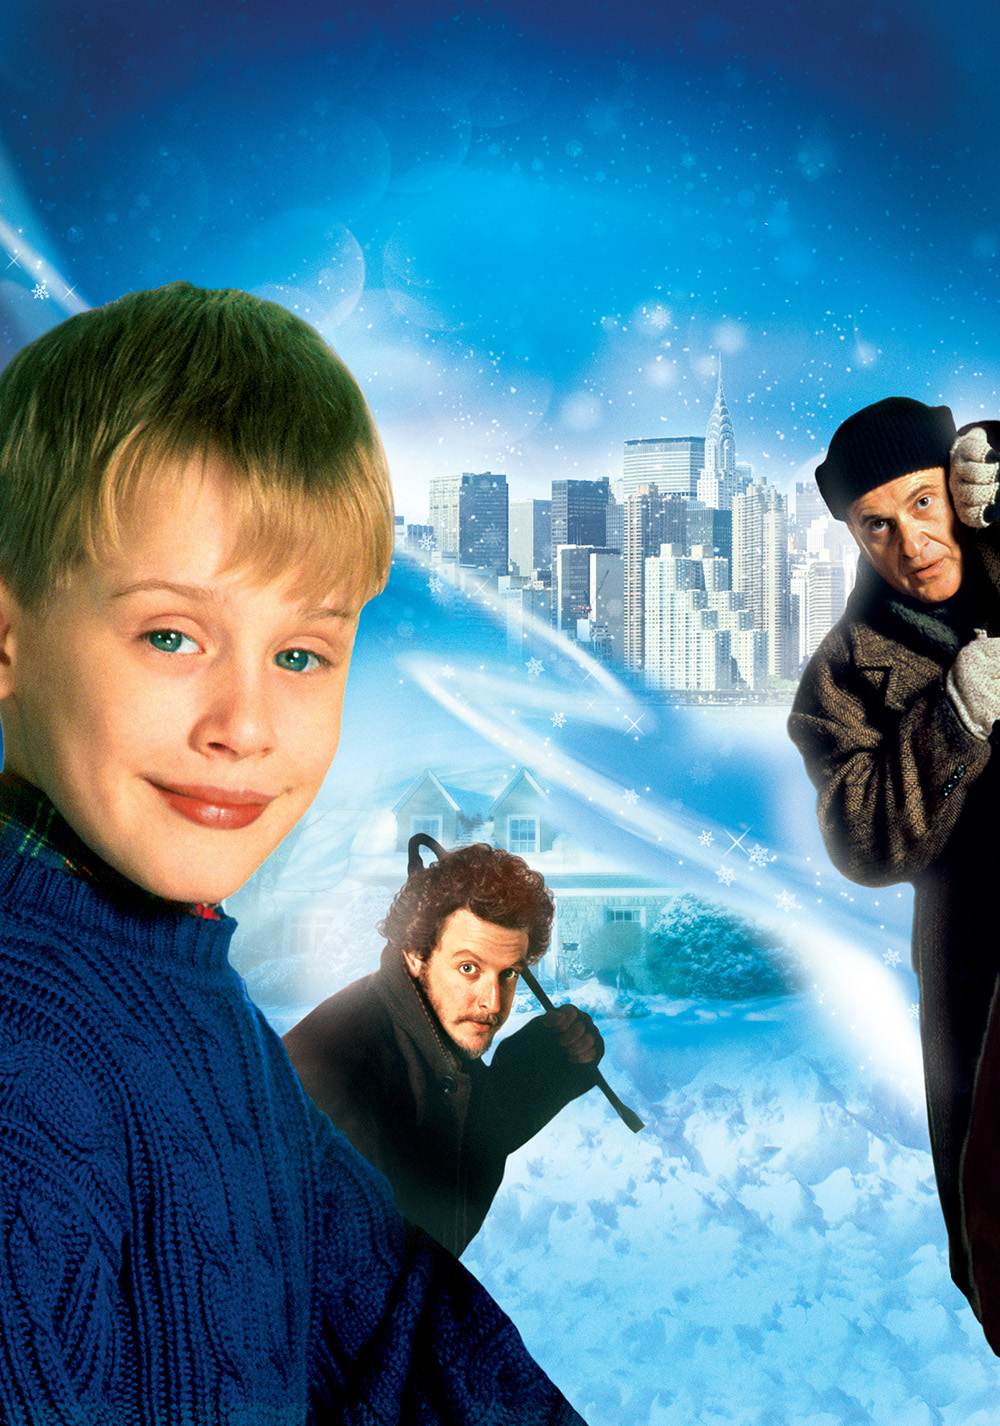 Home Alone 2: Lost In New York Picture